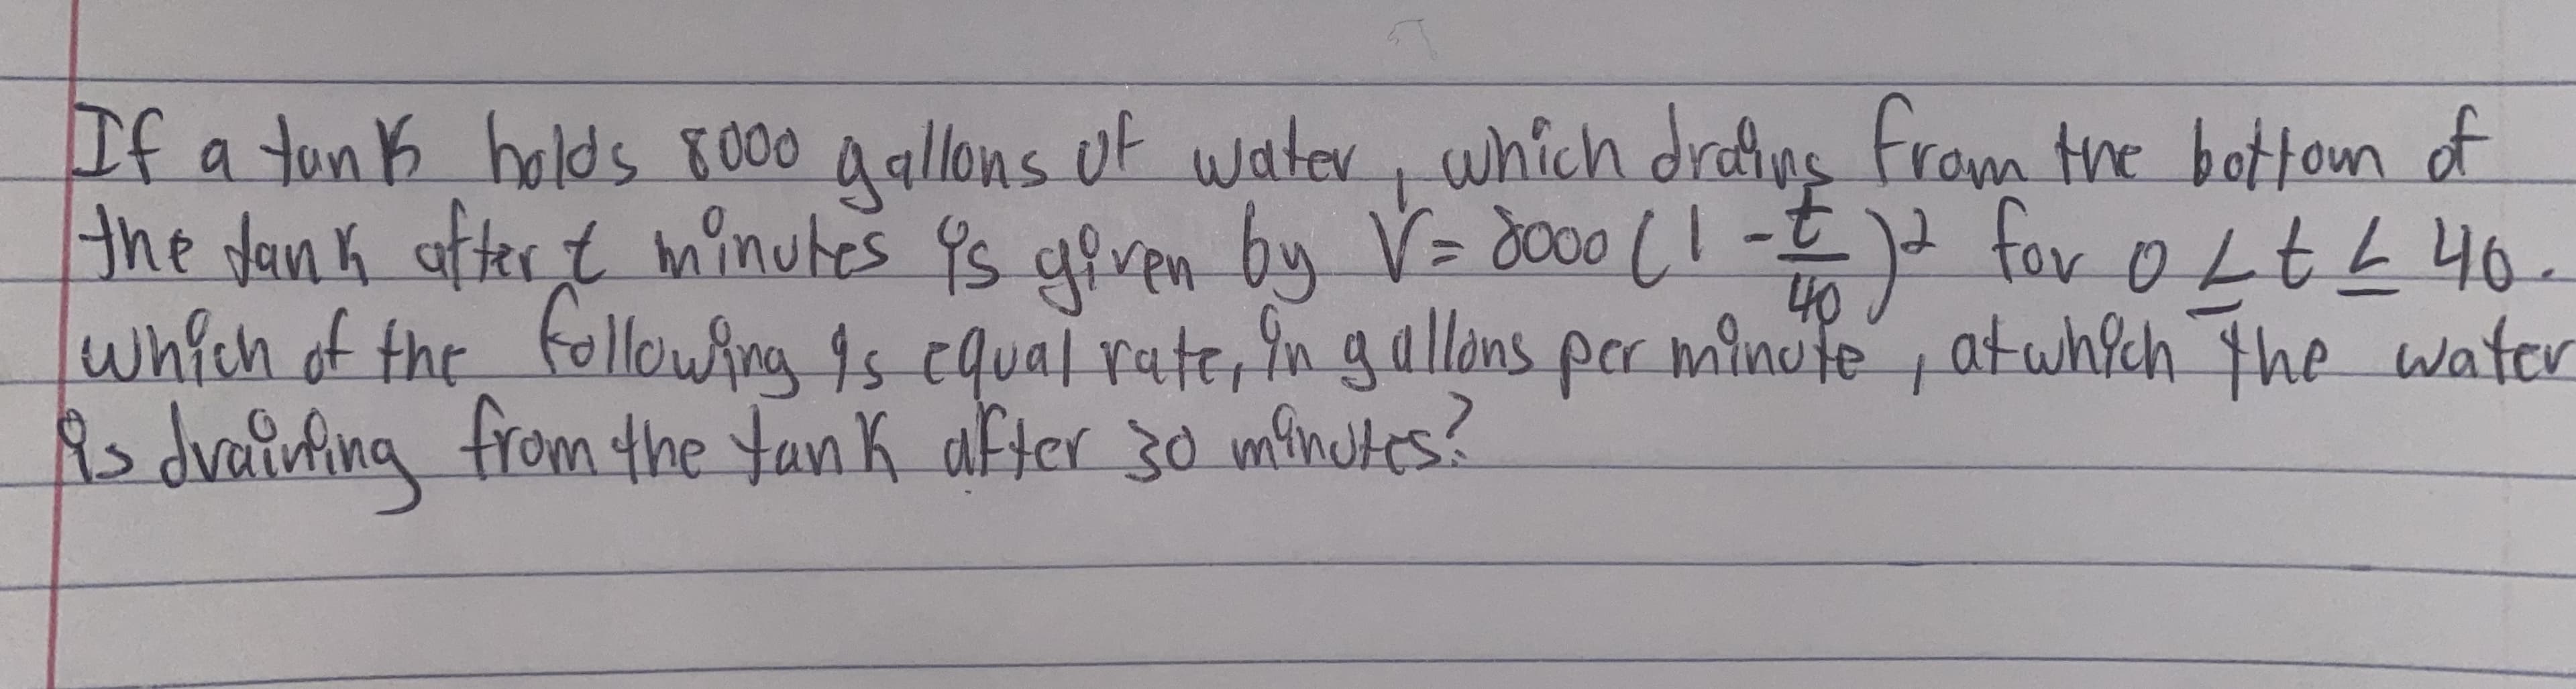 If a ton K holds K000 Aallons of watev,
the dan k after t minutes 9s giren by V= d000 (!
which of the felloAng 1s cqual rate, ingallans par minule
Rs dvaiufing
which drefins Fram the botton of
- for 0LEL 40.
40
atwhich the water
from the tan k after 30 minutes?
